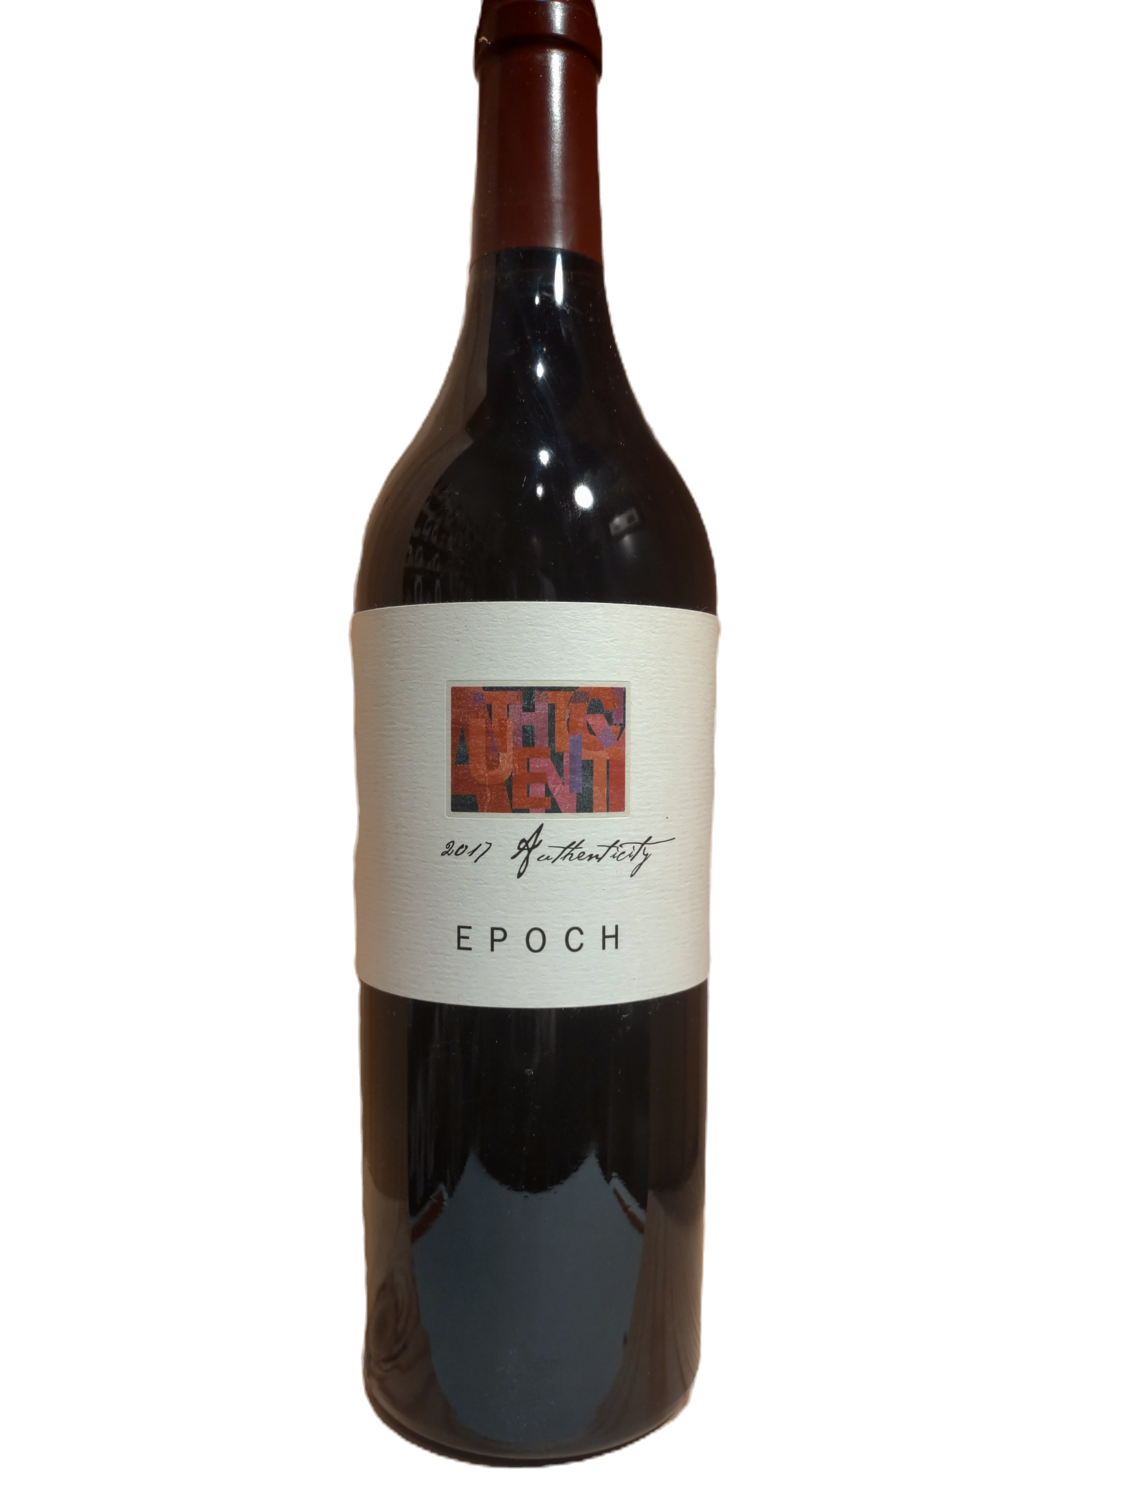 Epoch "Authenticity" Red Blend Paso Robles, California 2017